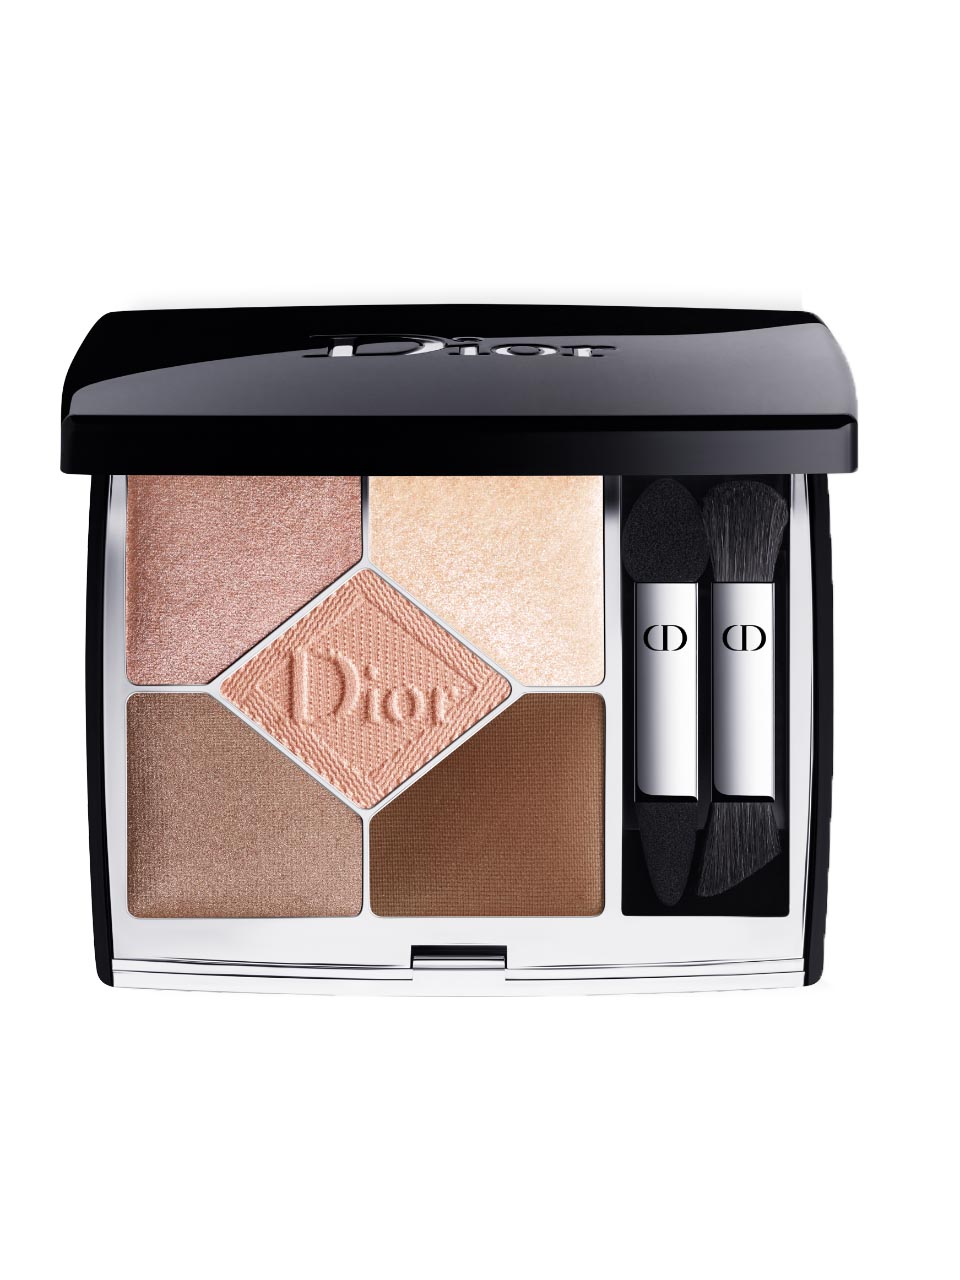 Dior 5 Couleurs Couture Eyeshadow Wardrobe N° 649 Nude Dress 7 g null - onesize - 1